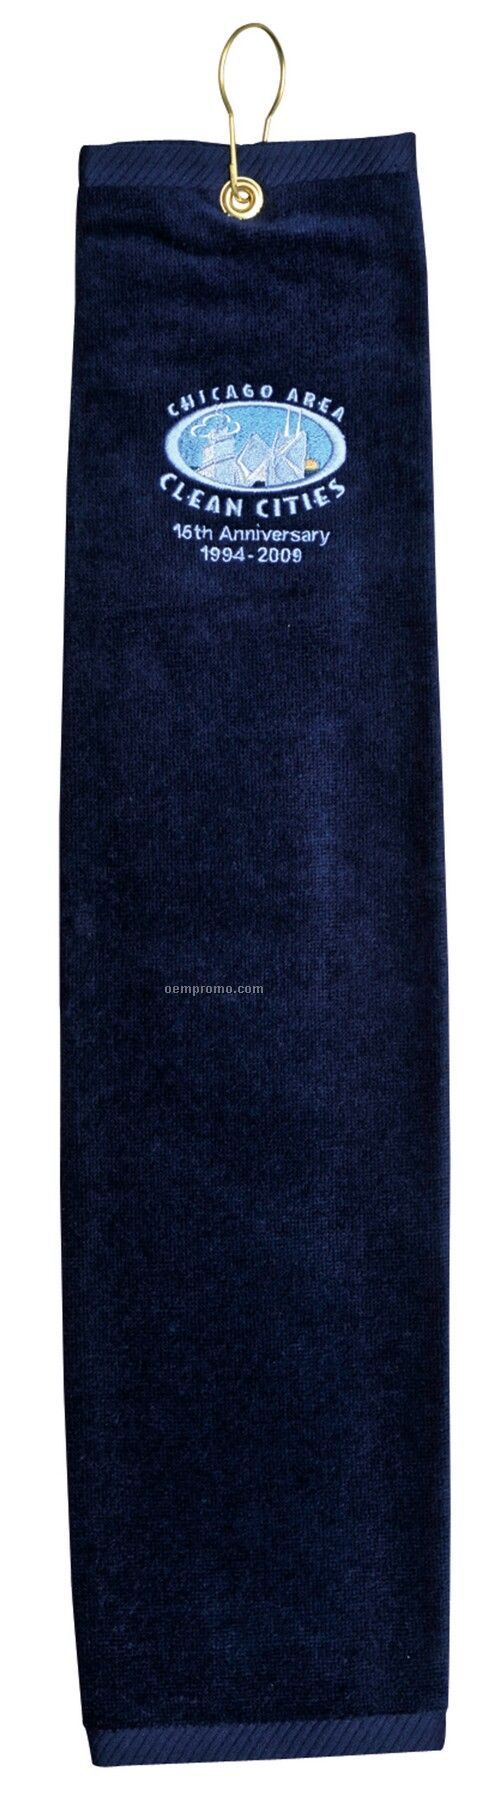 Diamond Collection Golf Towel Colors - Printed 3 Day Proship